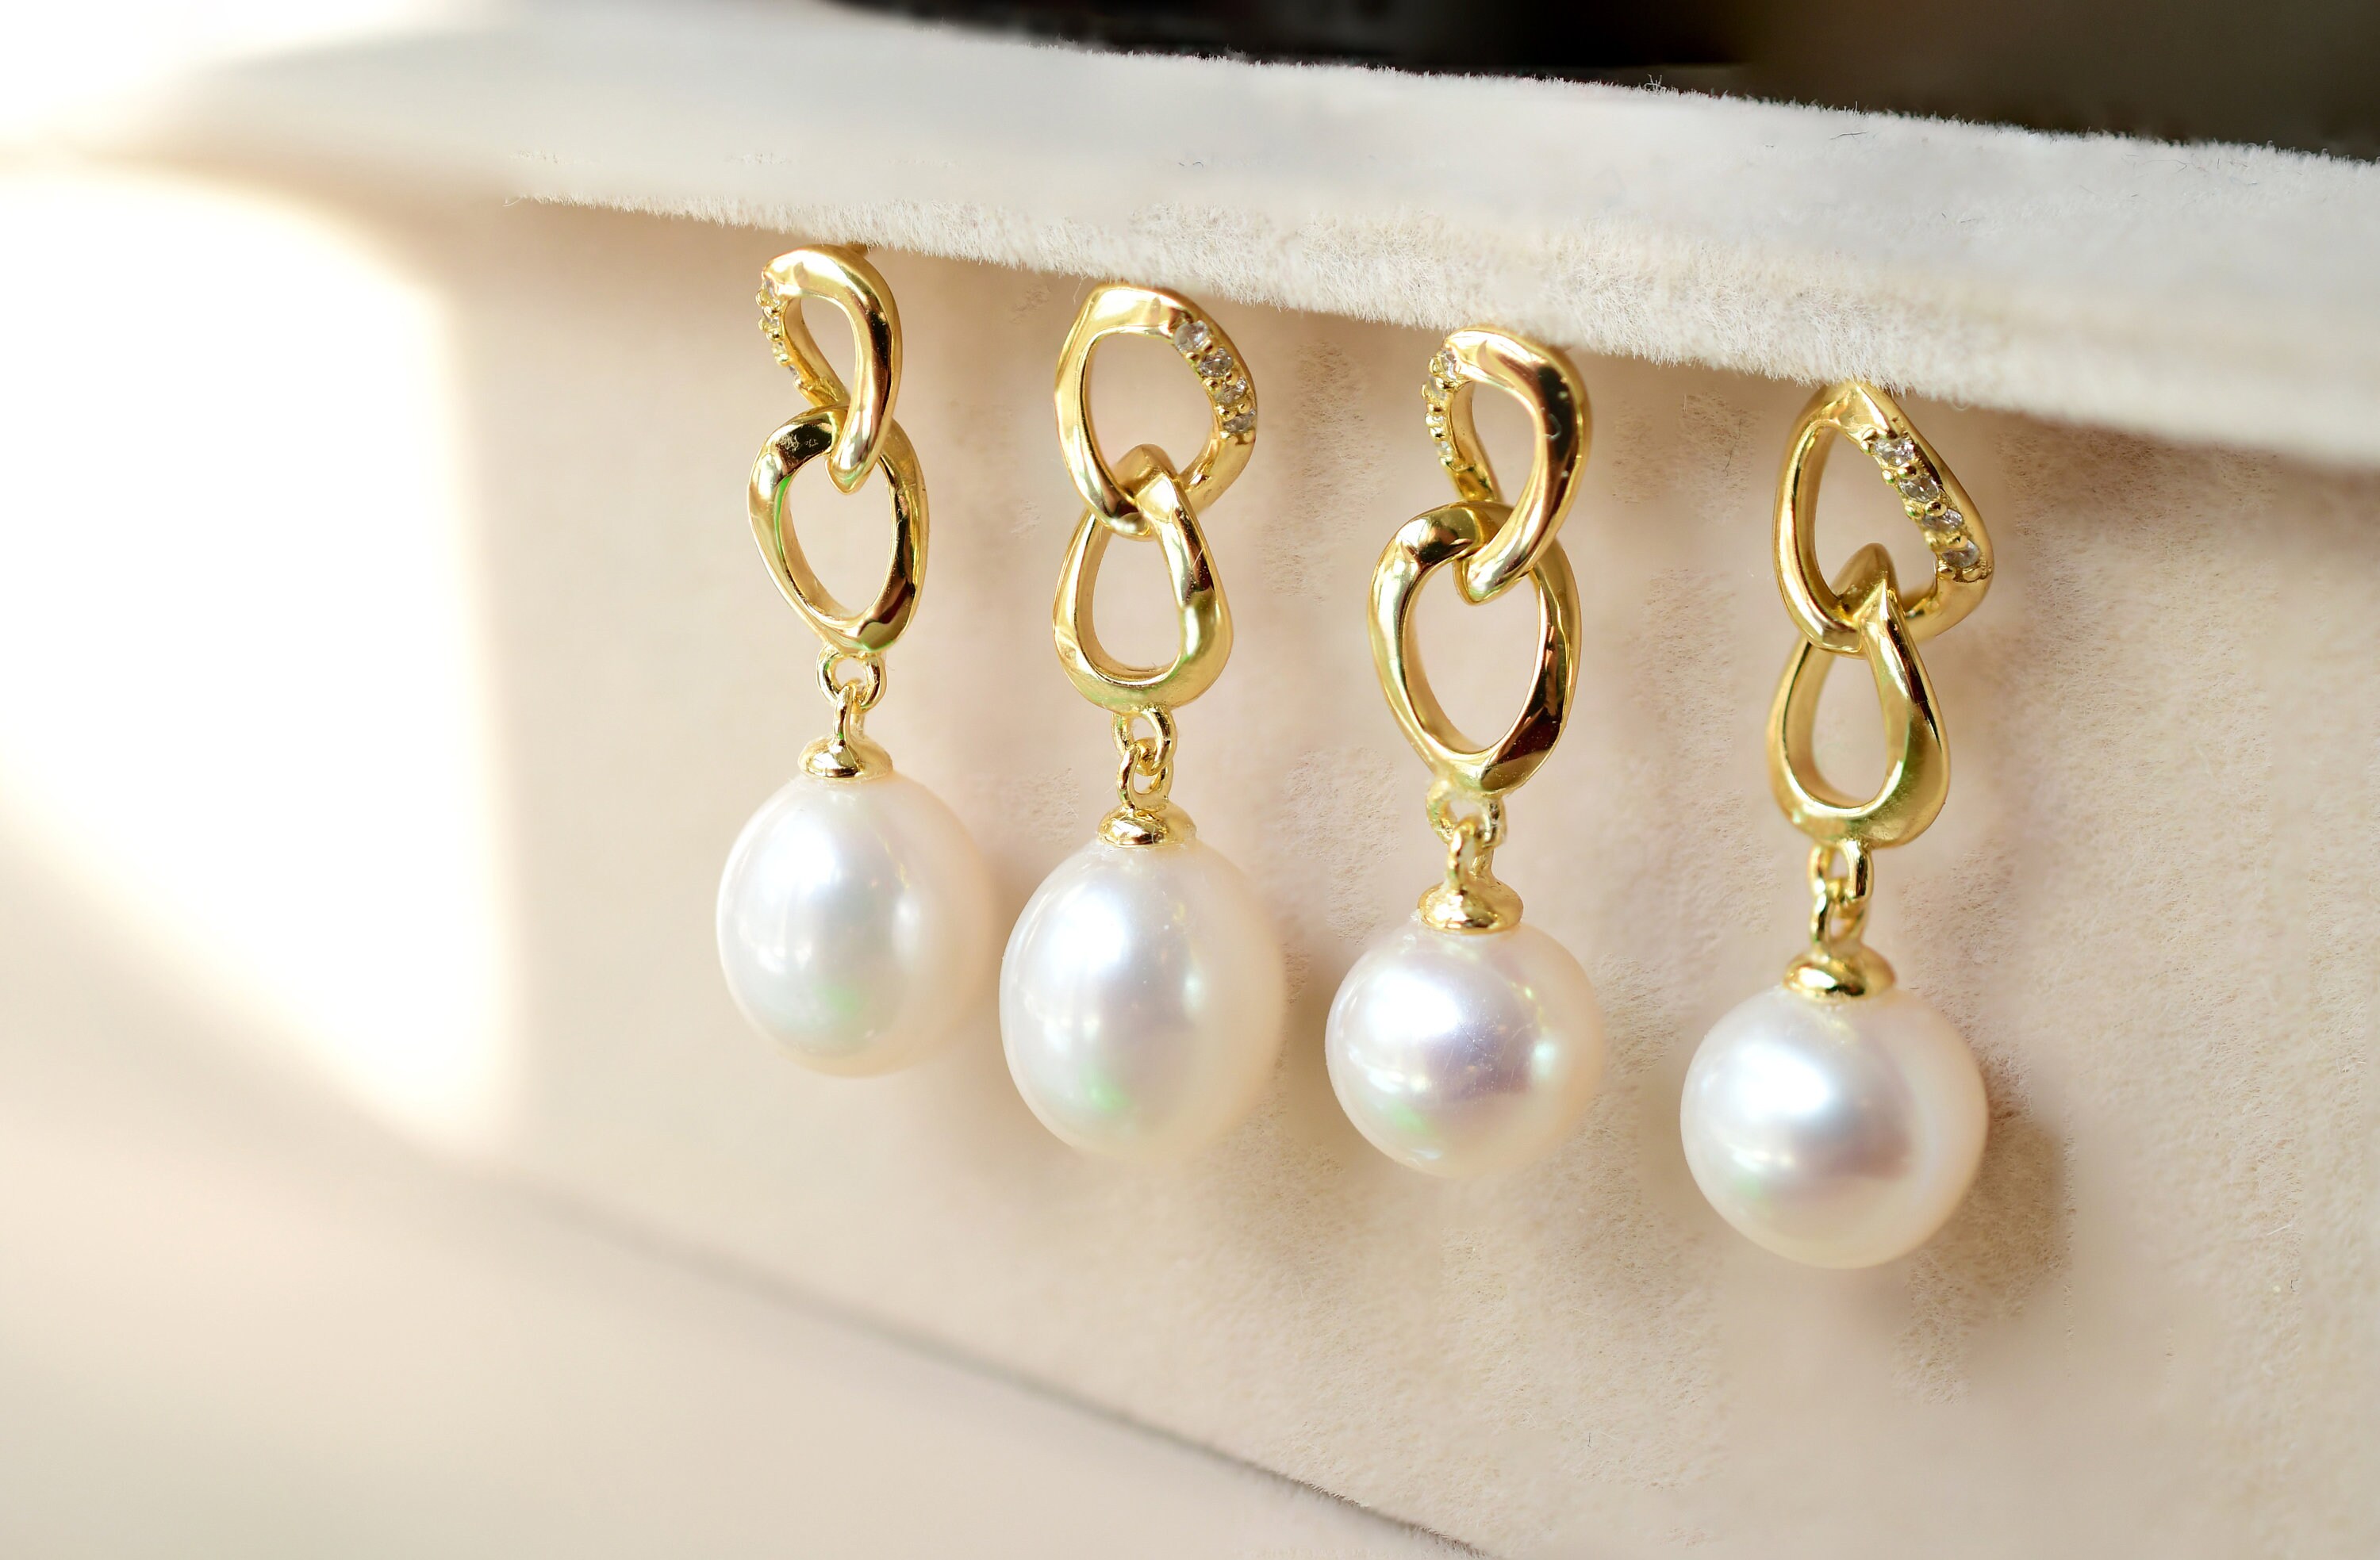 Buy Tiny Pearl Studs Gold Filled, White Freshwater Pearl Post Earrings,  Small Pearl Dangle Earrings Online in India - Etsy